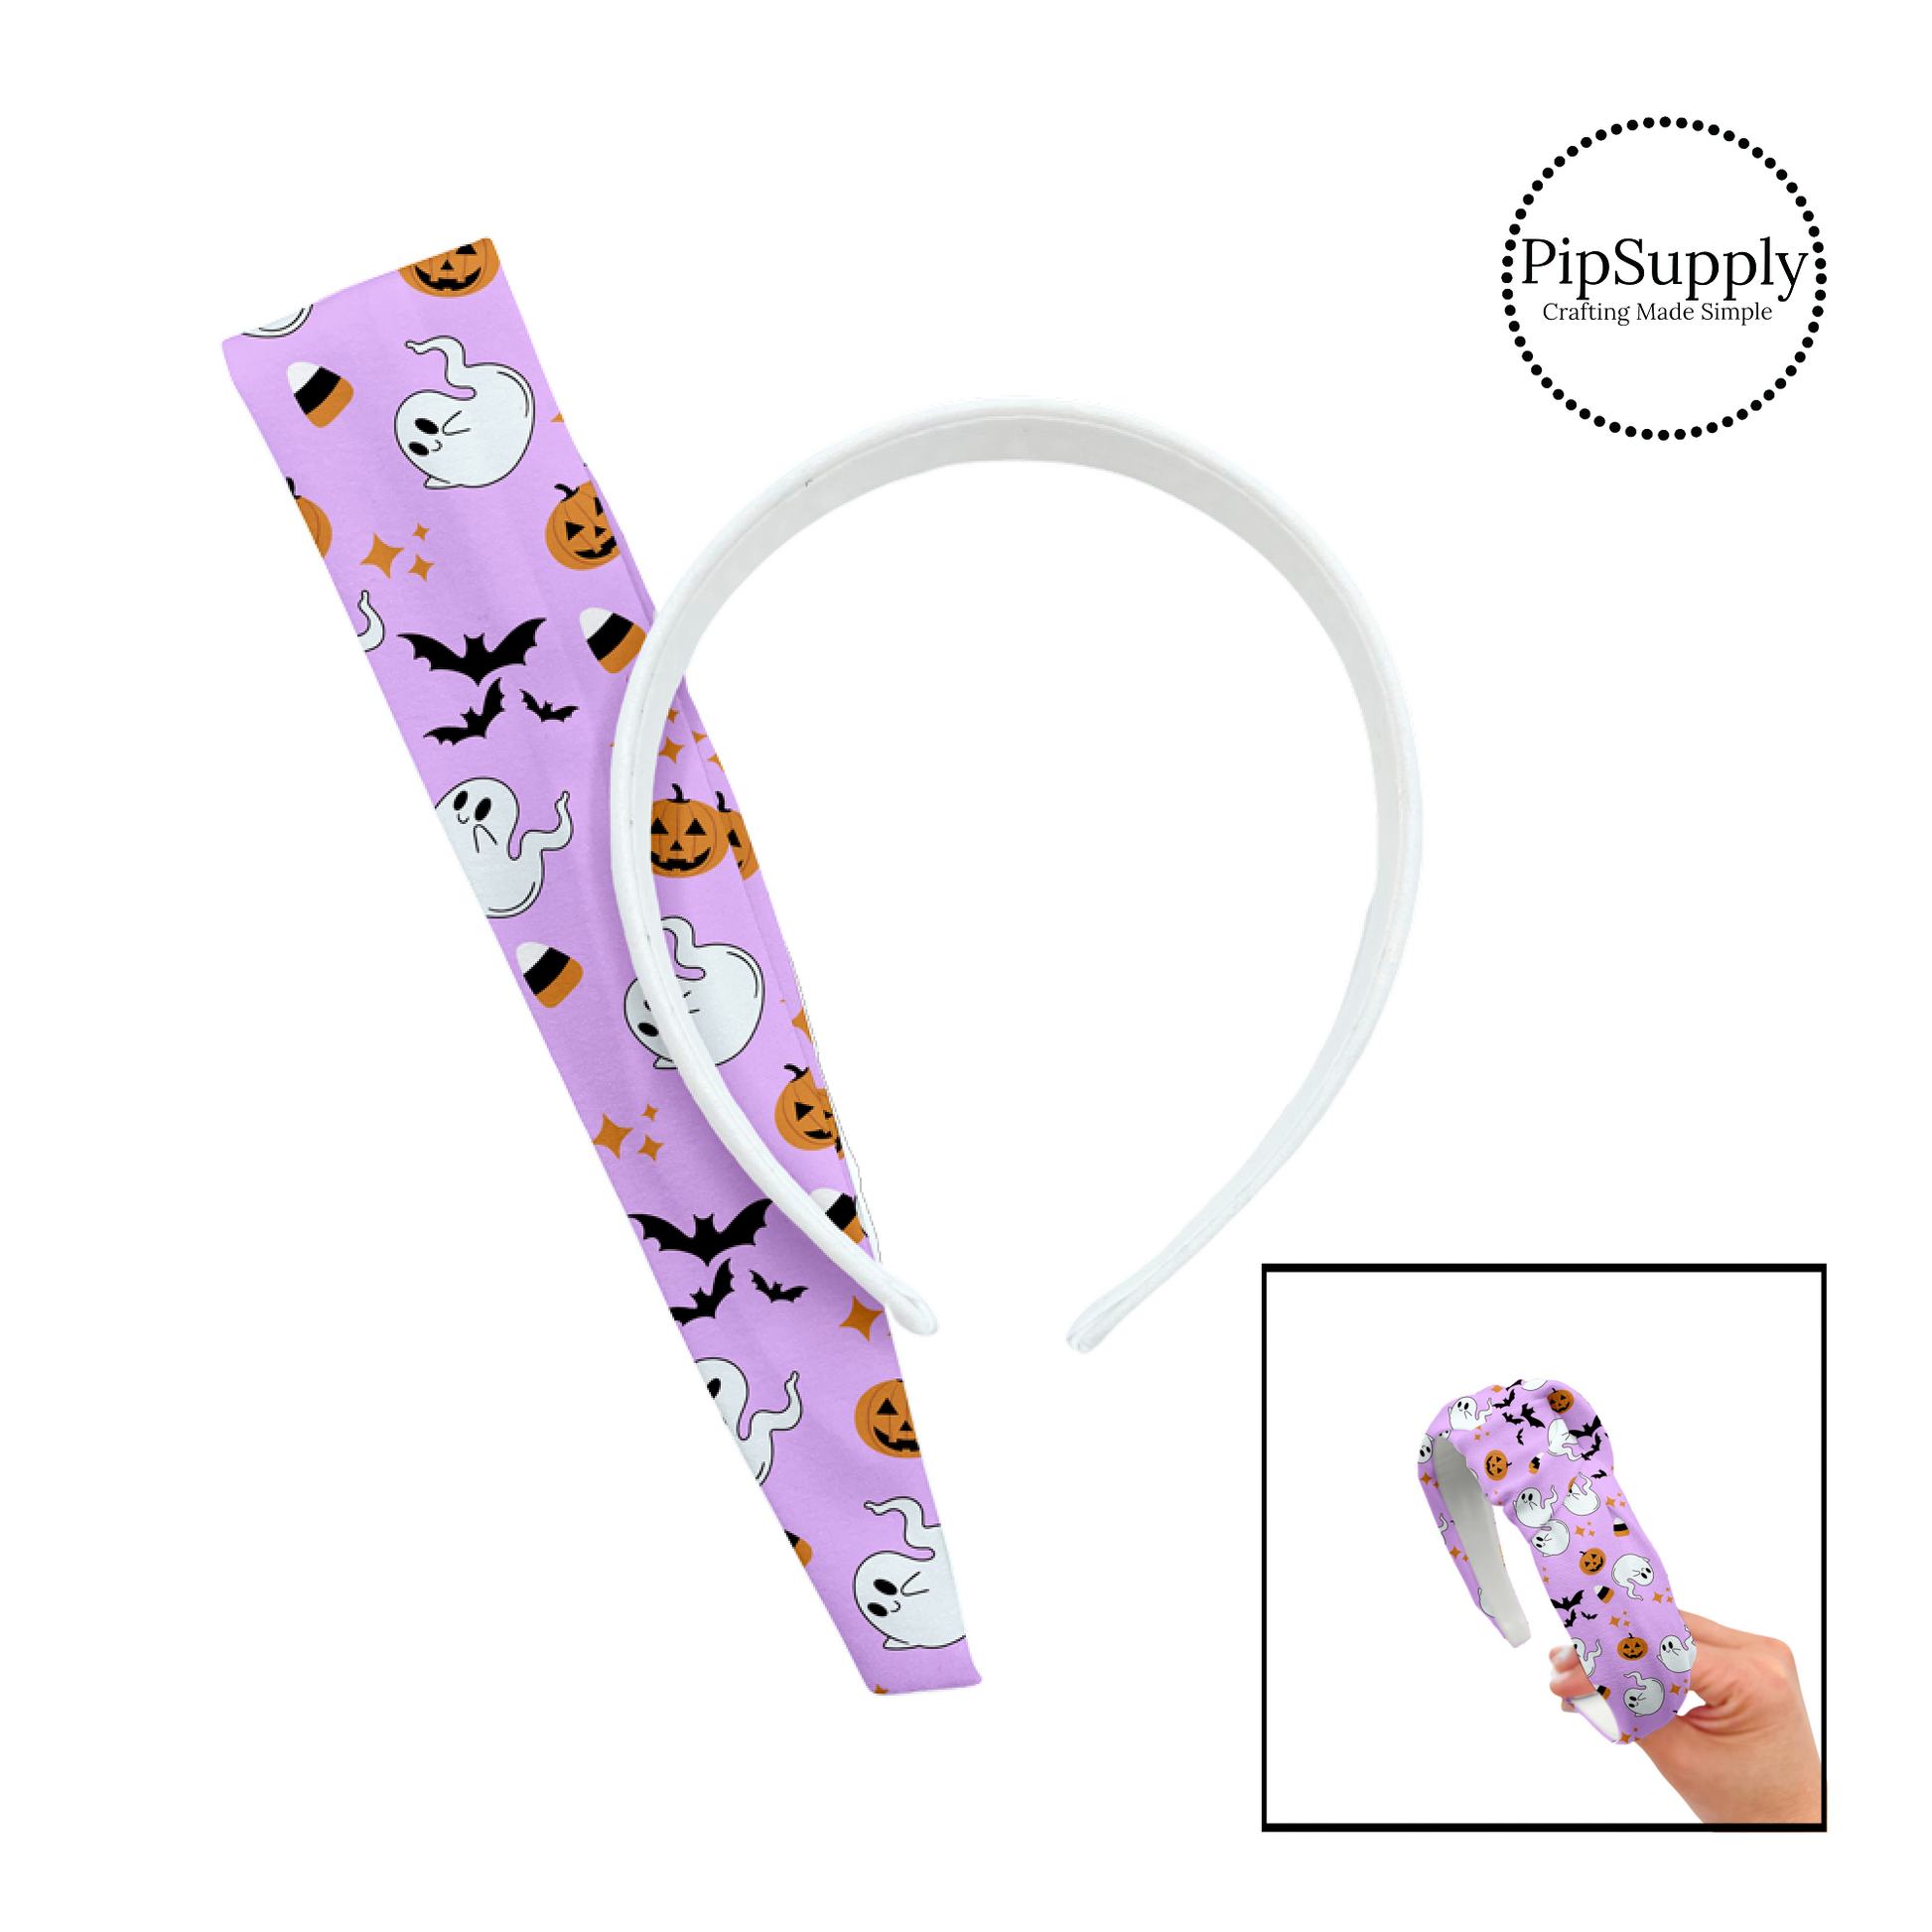 Candy corn, white ghost, pumpkins, bats, and stars on purple knotted headband kit